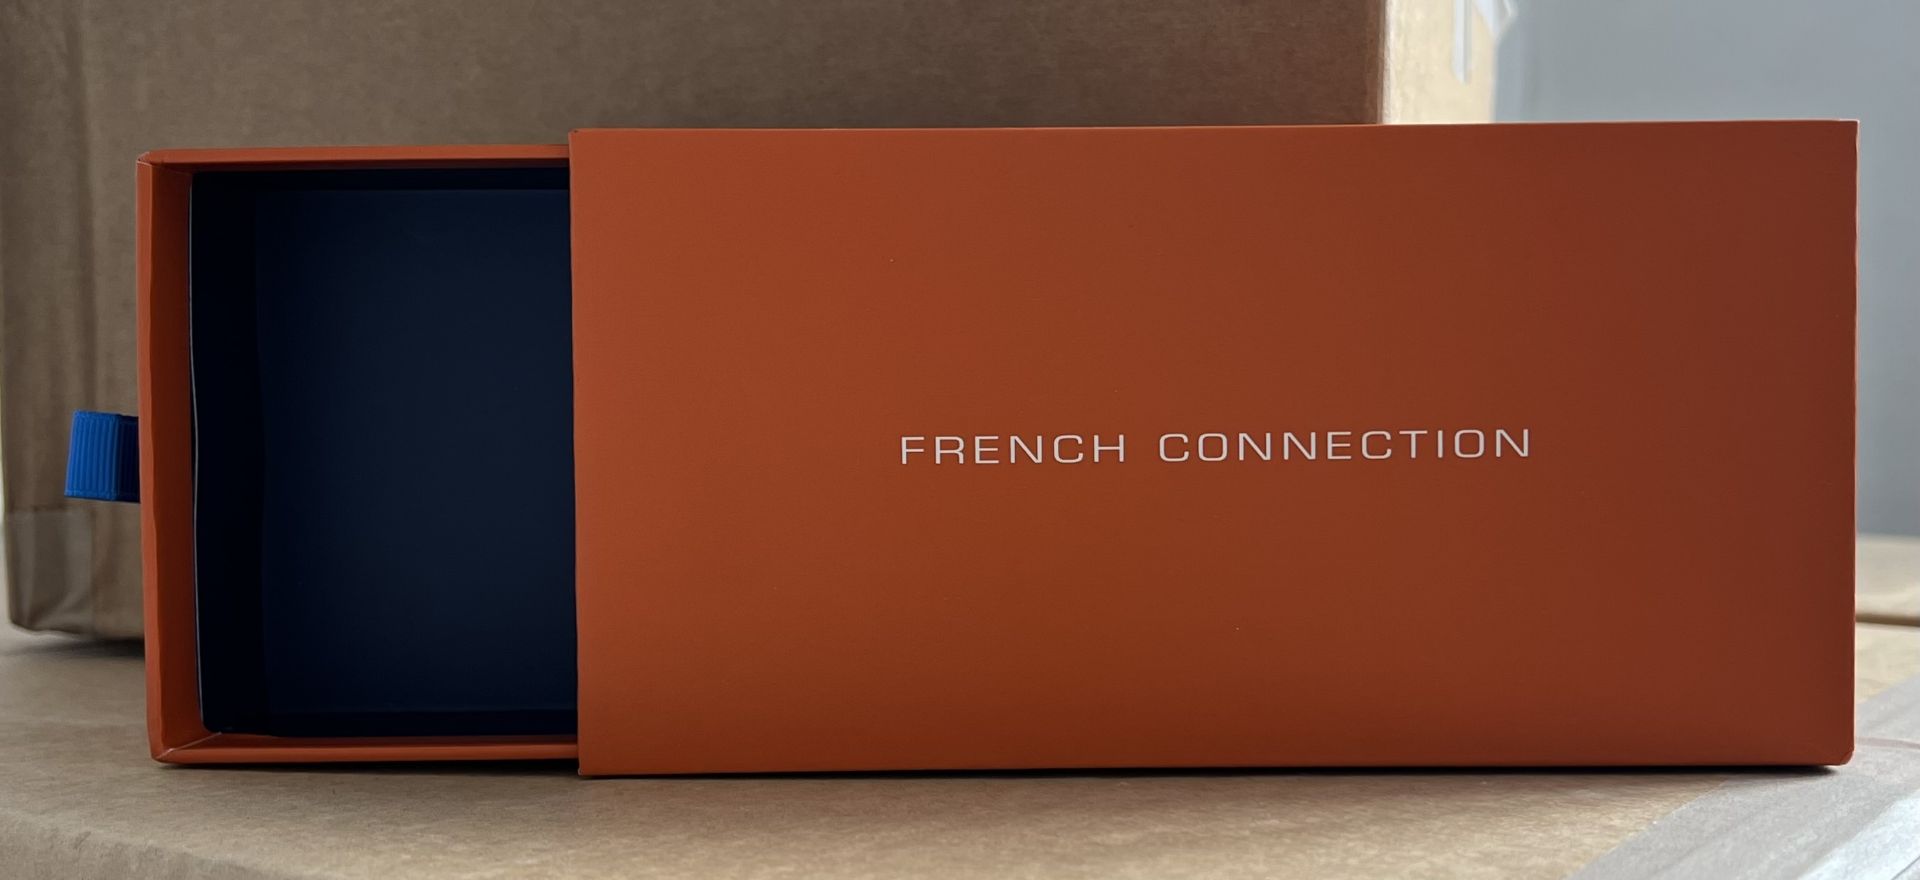 88 x French Connection Glasses / Sunglasses Orange Boxes - (NEW) - SELL FOR Â£440+ !